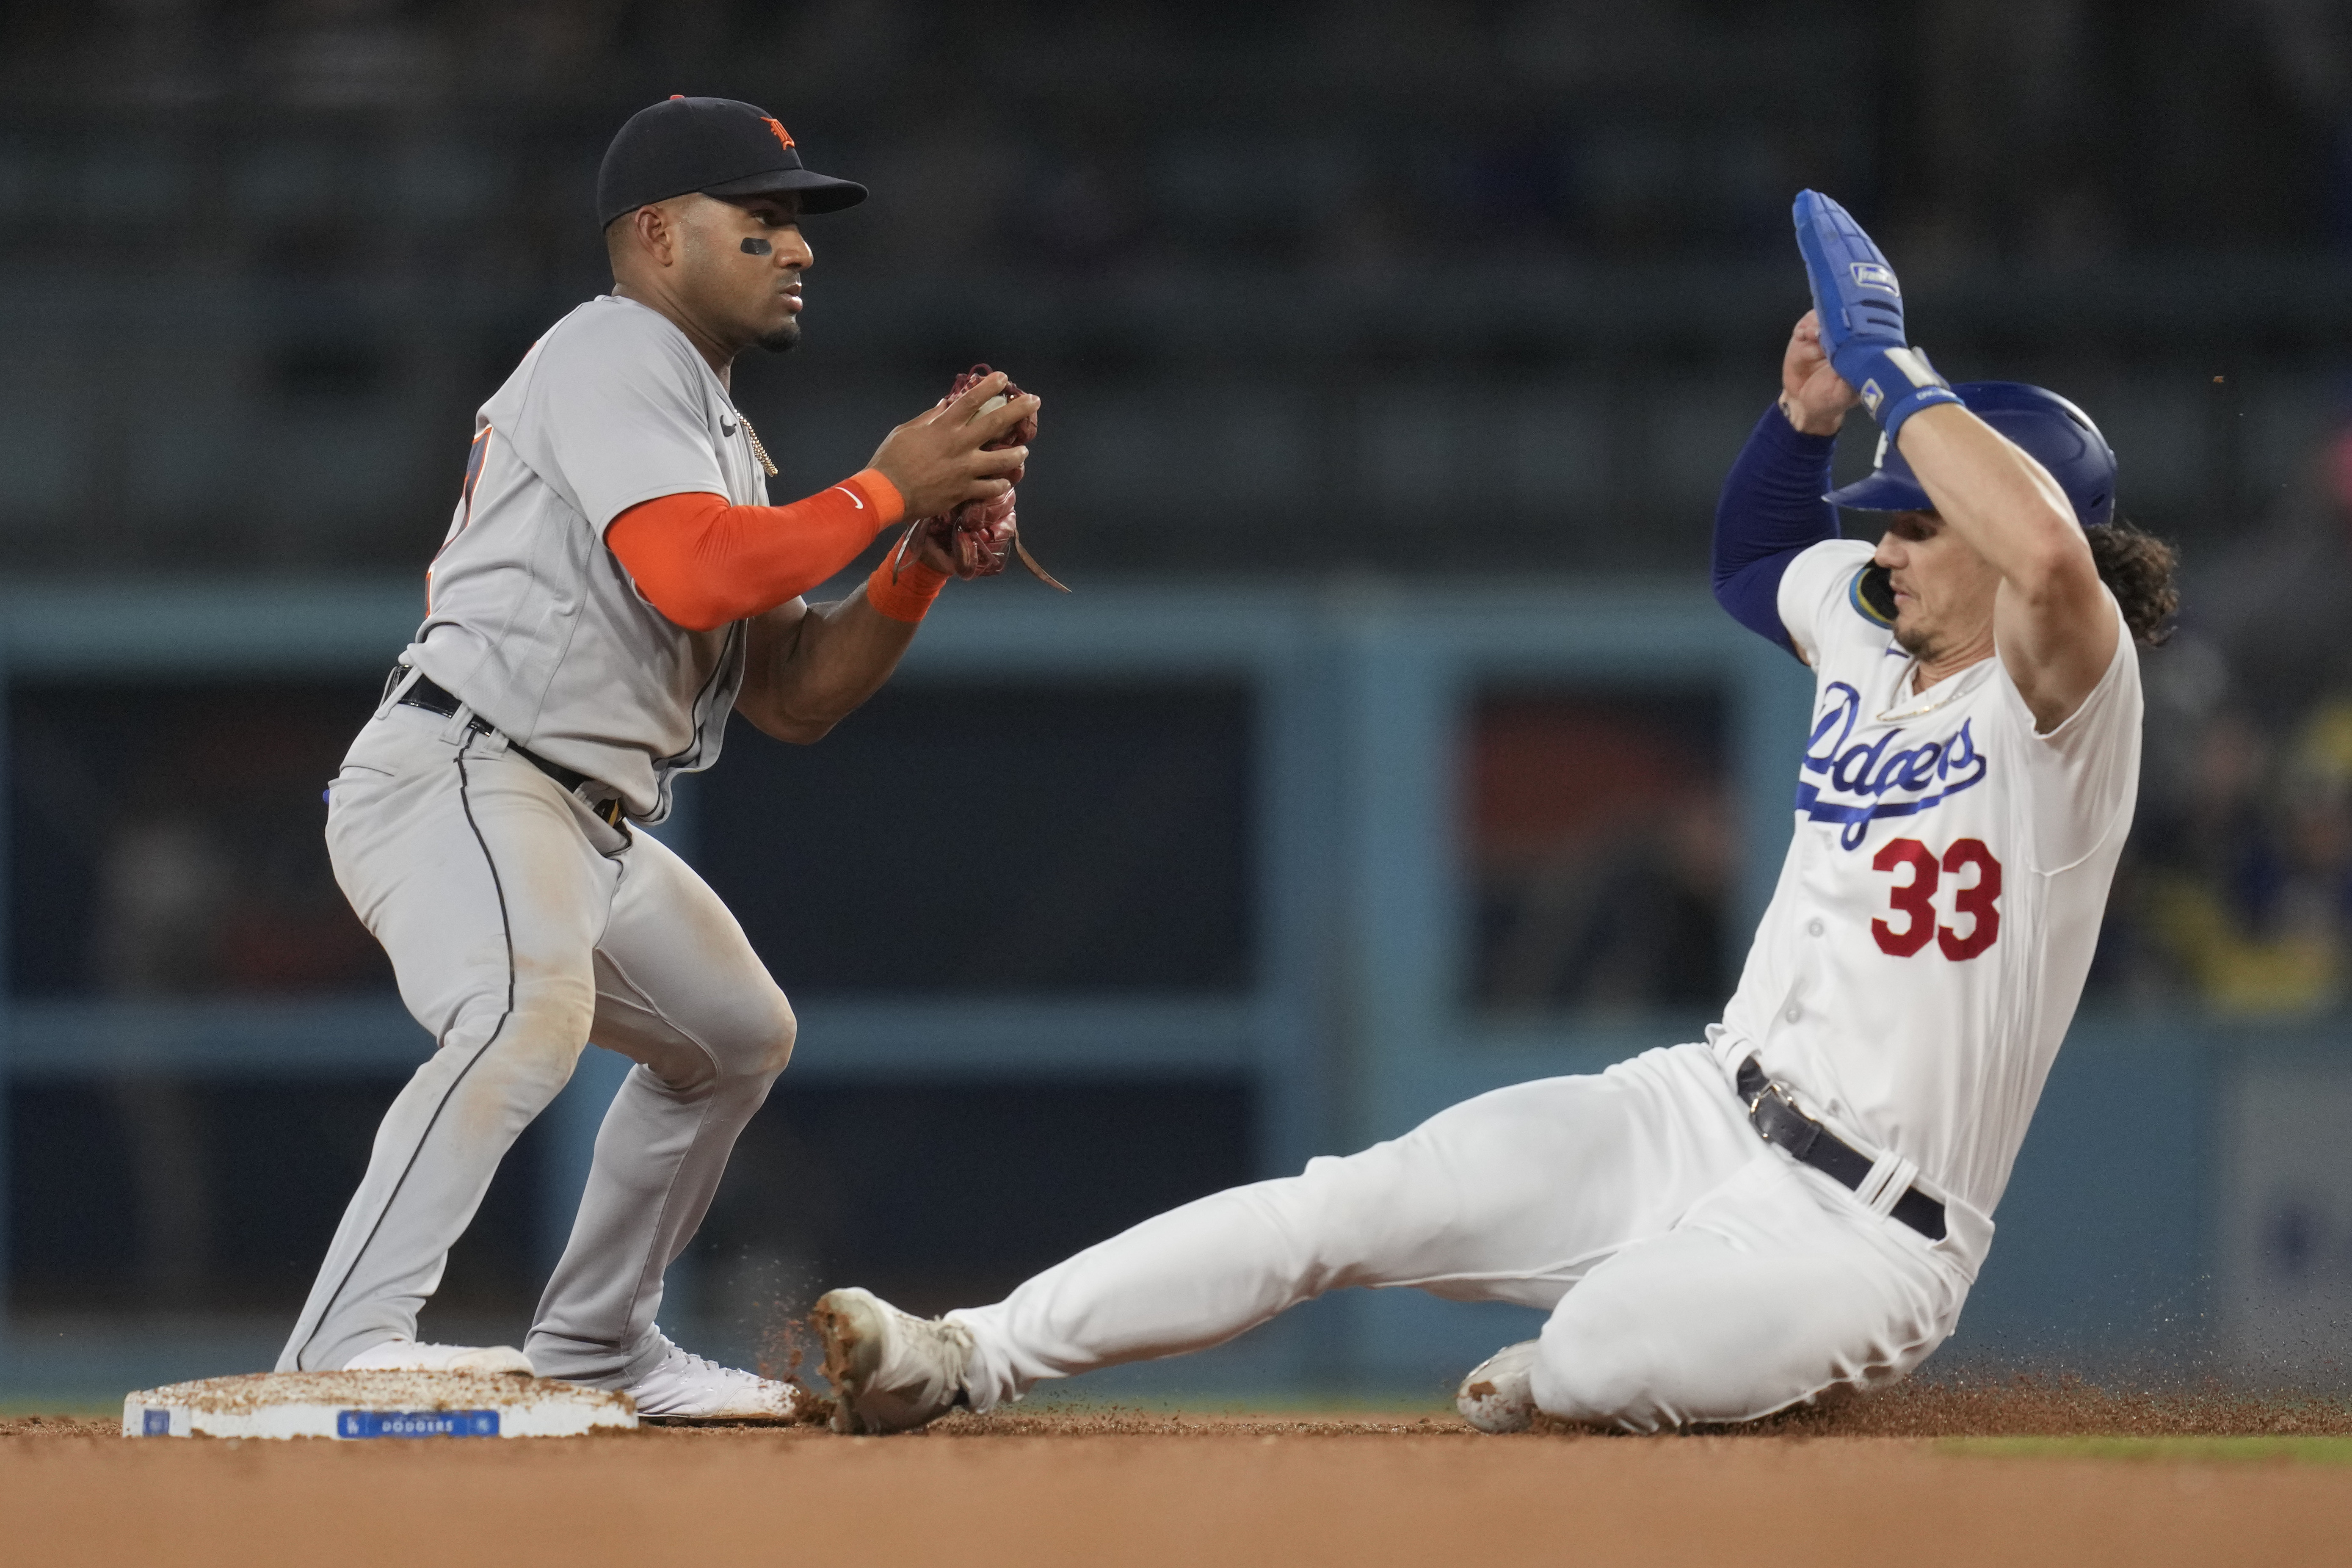 Watch Dodgers vs. Guardians on MLB.TV Free Game